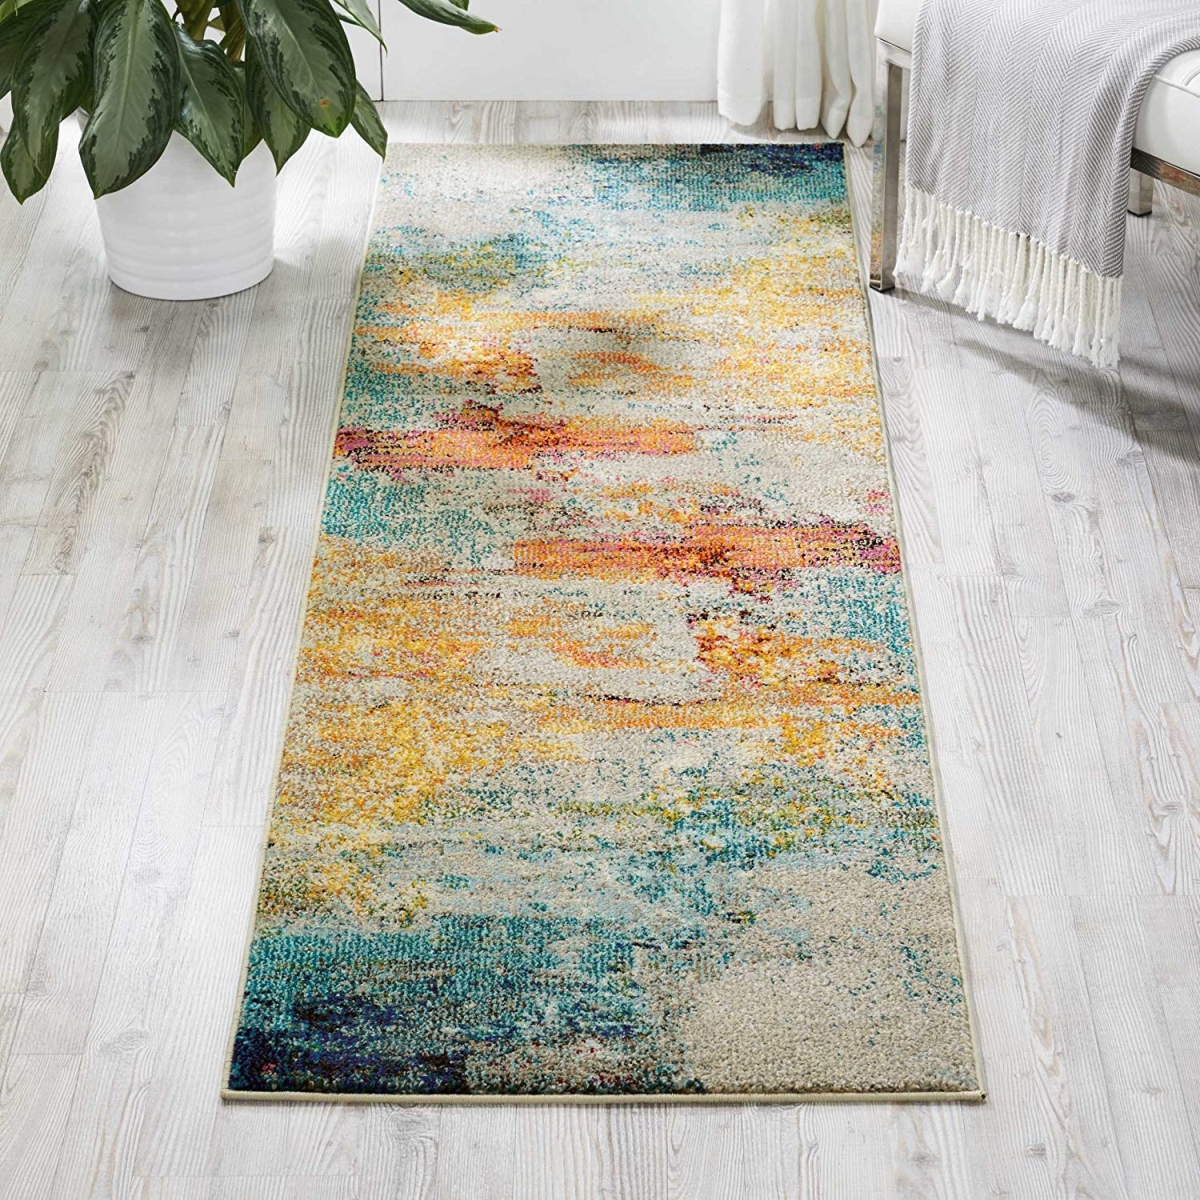 Mirag81565crm2277 Modern Abstract Runner Rug, Cream & Multi Color - 2 Ft. 2 In. X 7 Ft. 7 In.